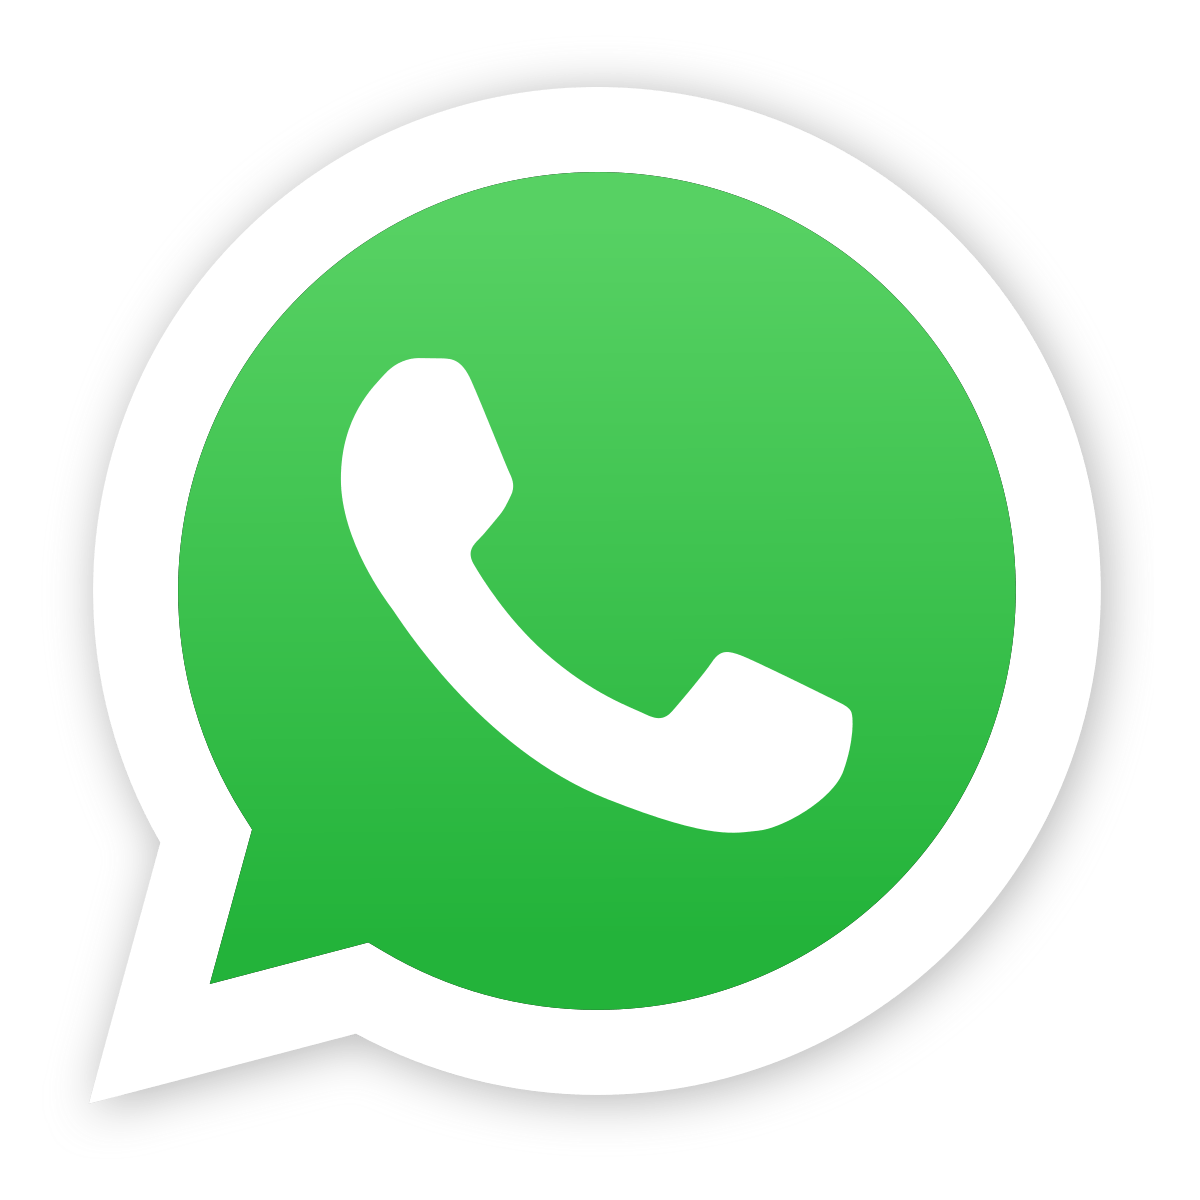 How can I get someone's IP from WhatsApp?